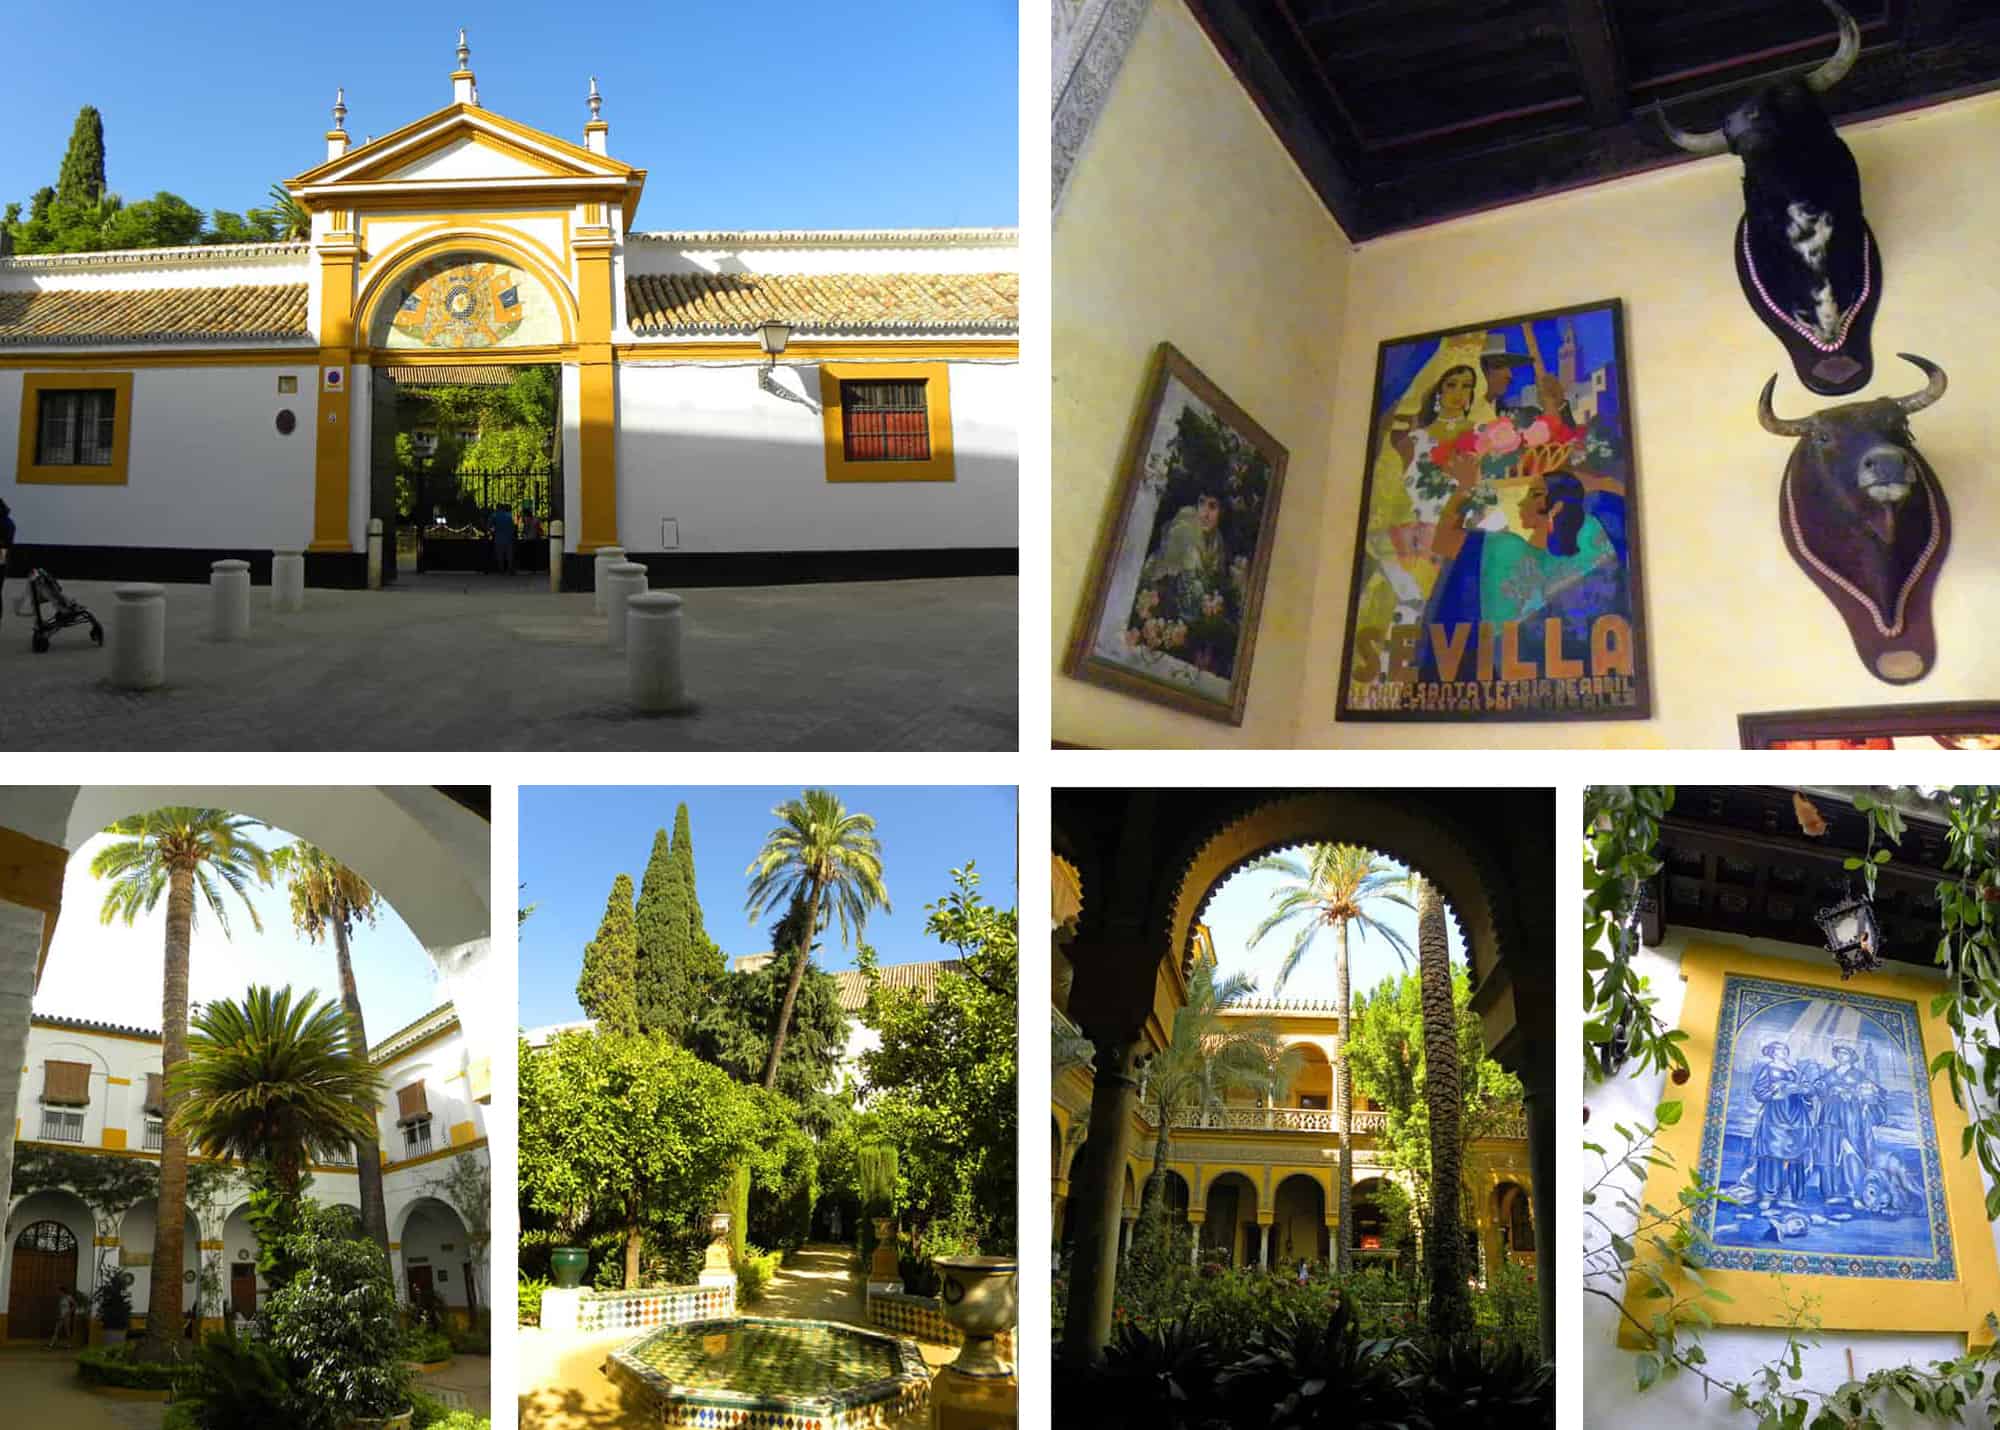 What to see in Seville on a budget